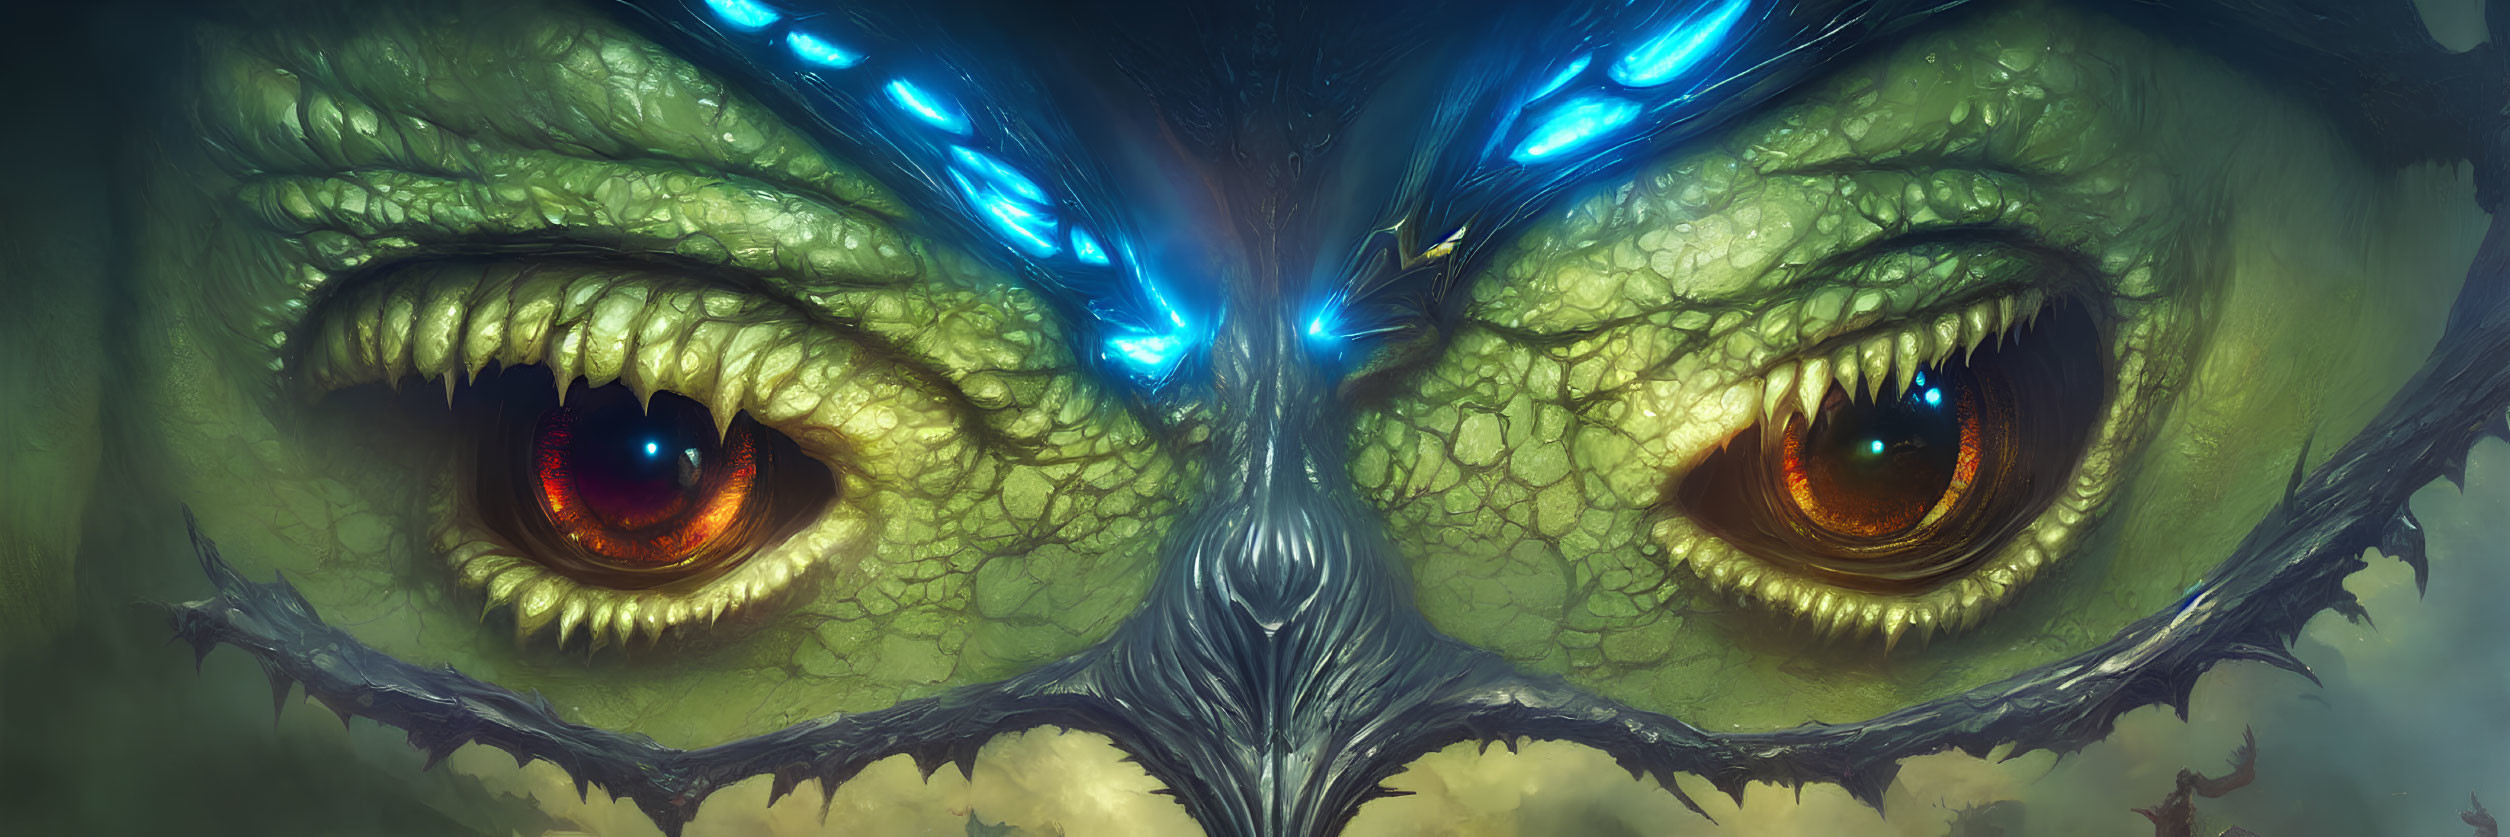 Detailed Image: Dragon's Face with Glowing Blue Markings and Yellow Eyes